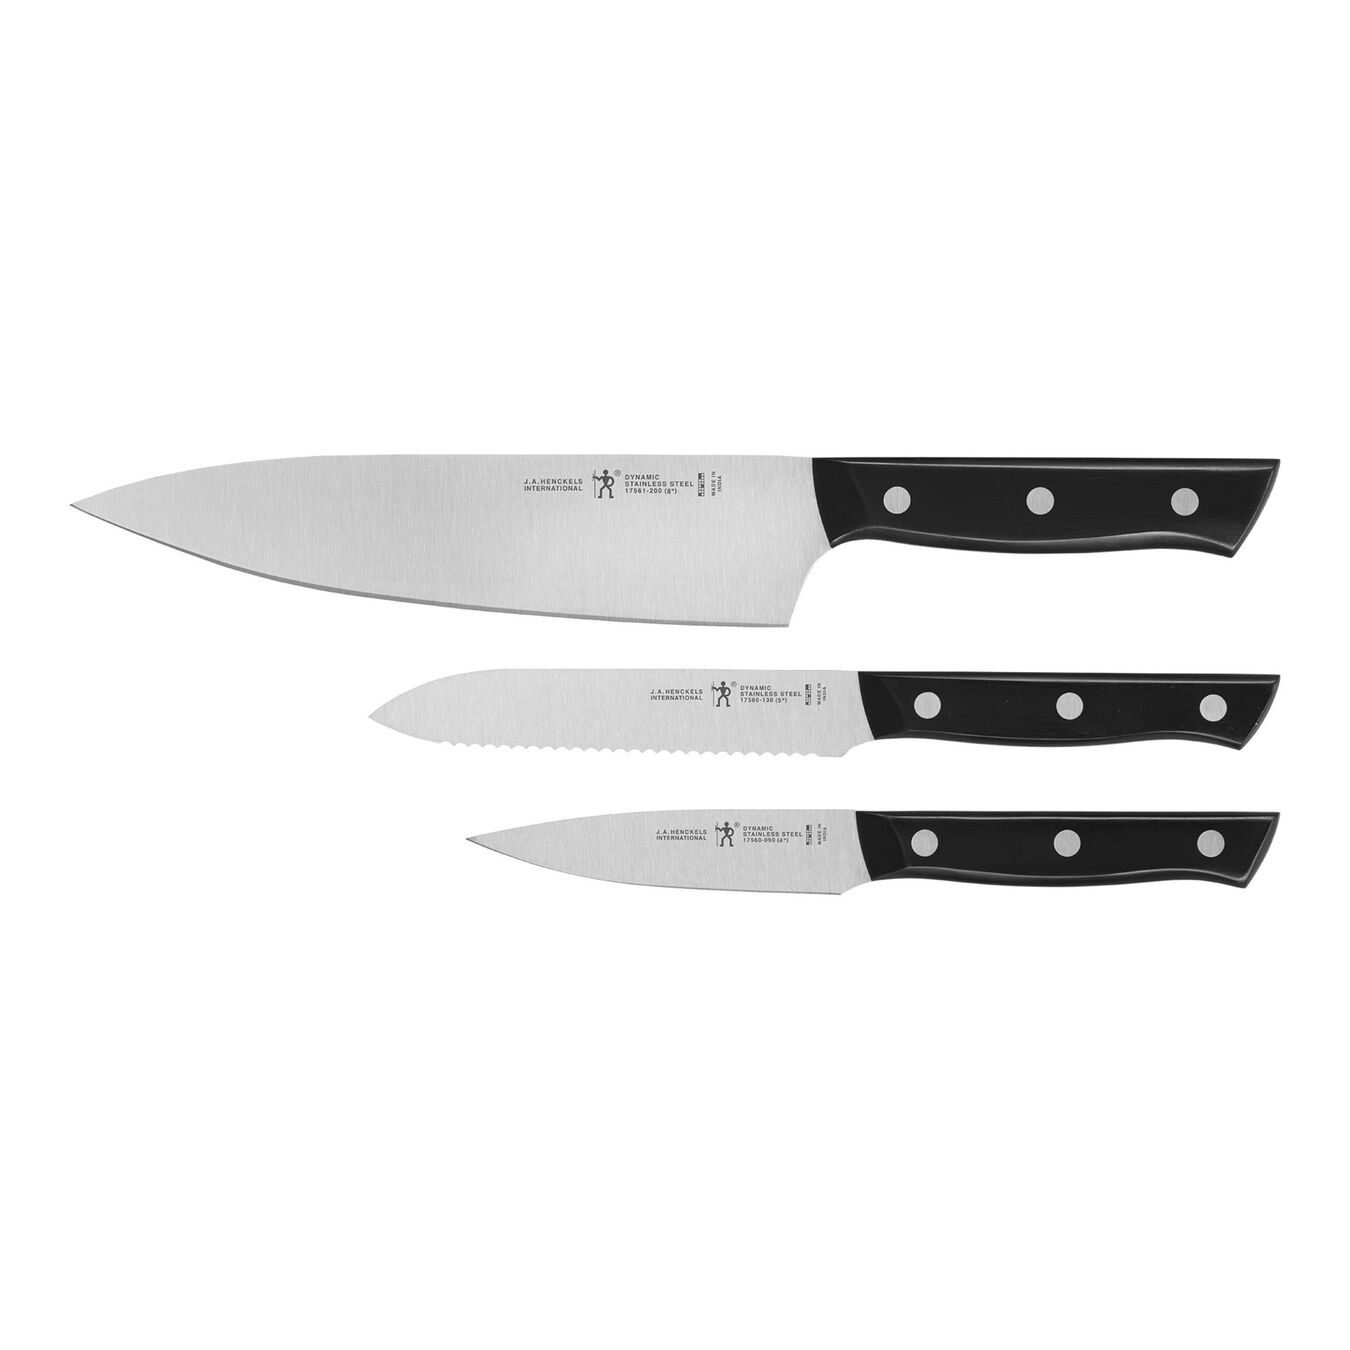 Henckels 17560-203 Dynamic Carving Knife ZWILLING J.A Black//Stainless Steel